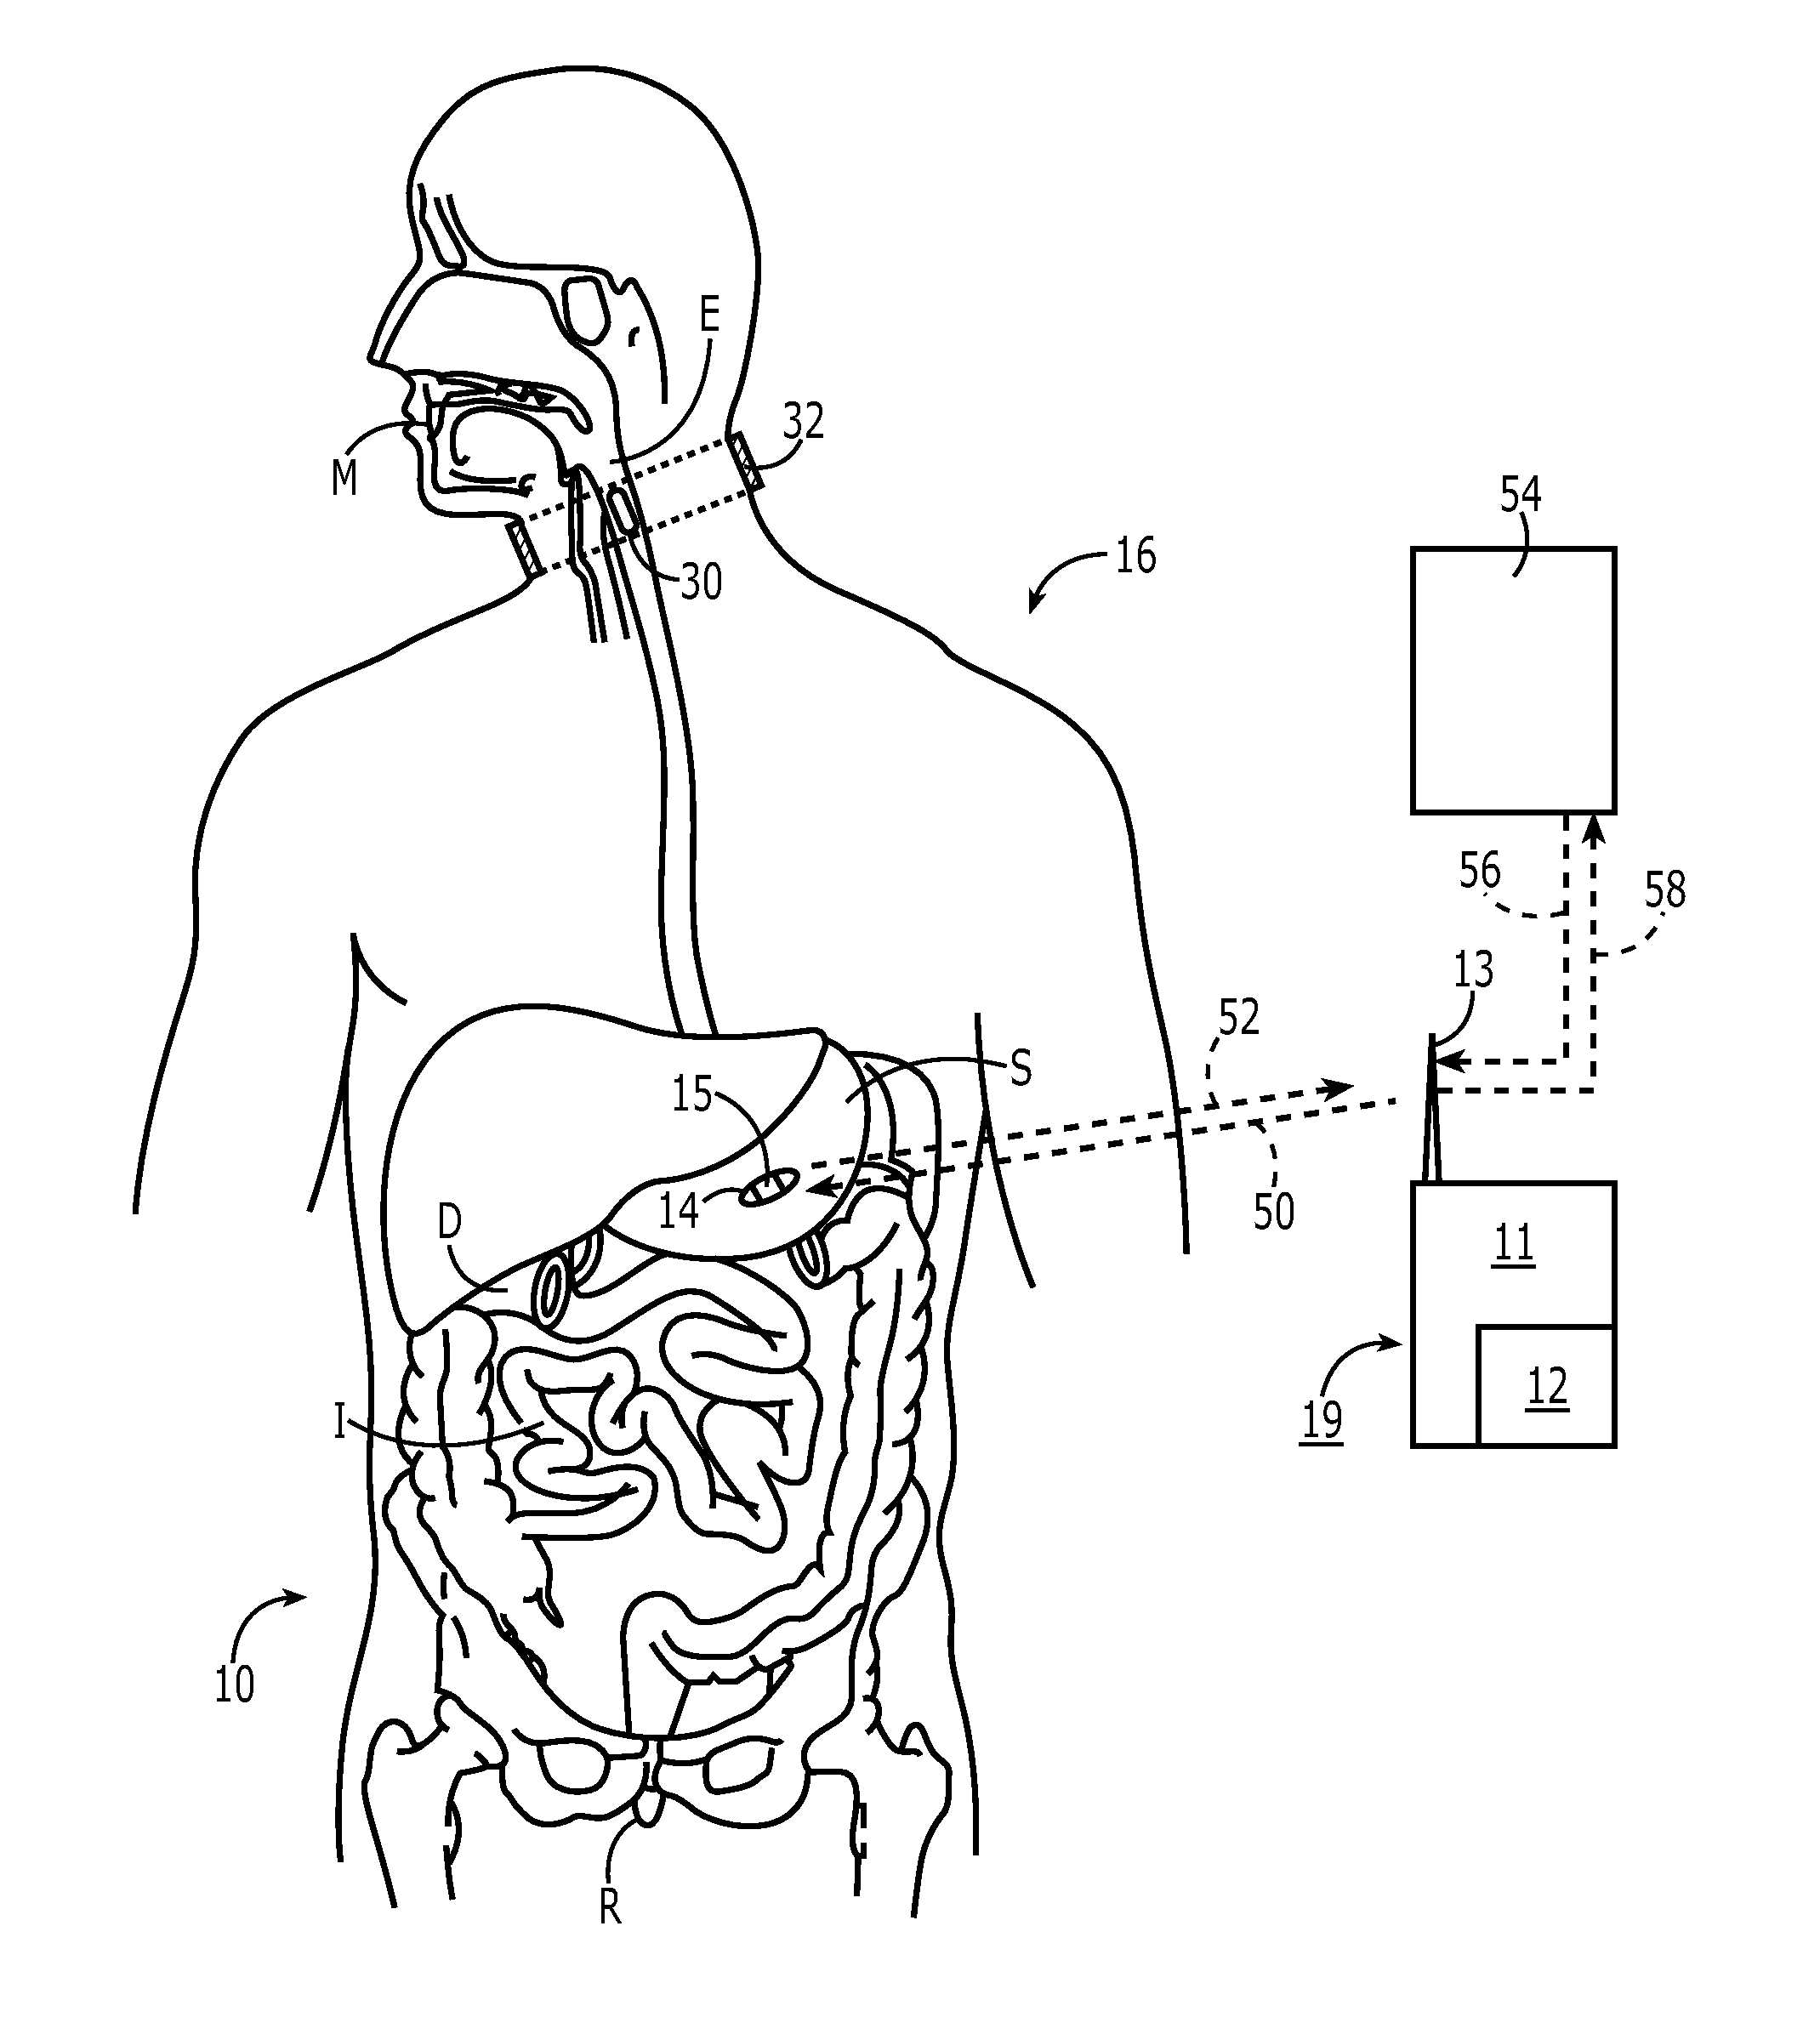 Electronic medication compliance monitoring system and associated methods